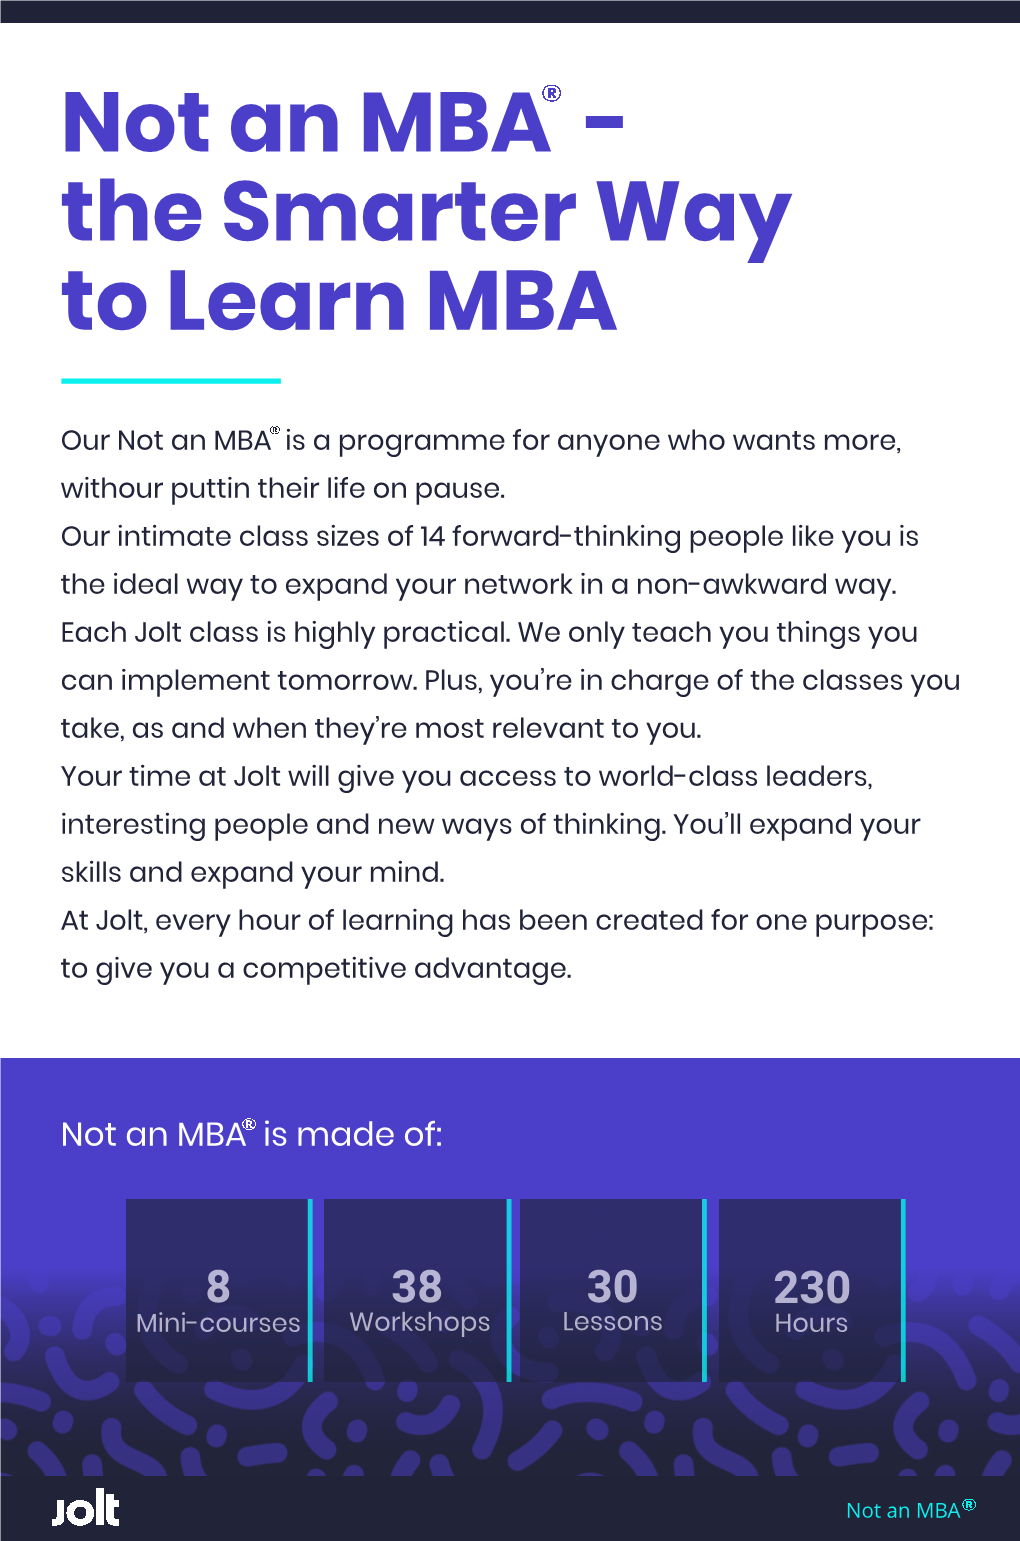 Not an MBA - the Smarter Way to Learn MBA